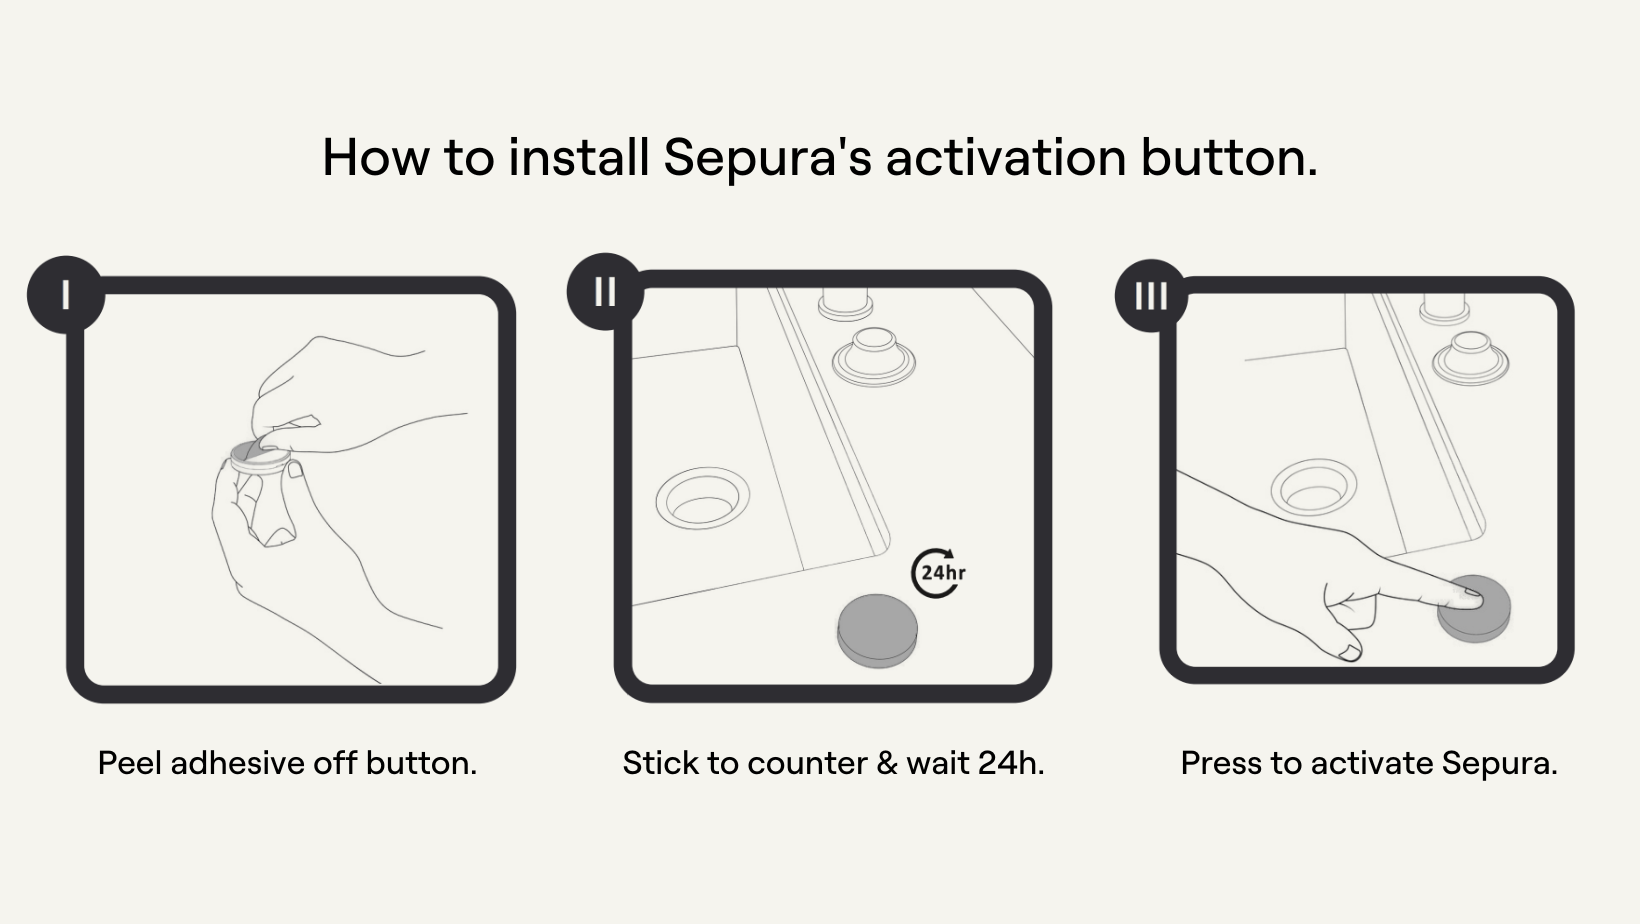 How to install Sepura's wireless button